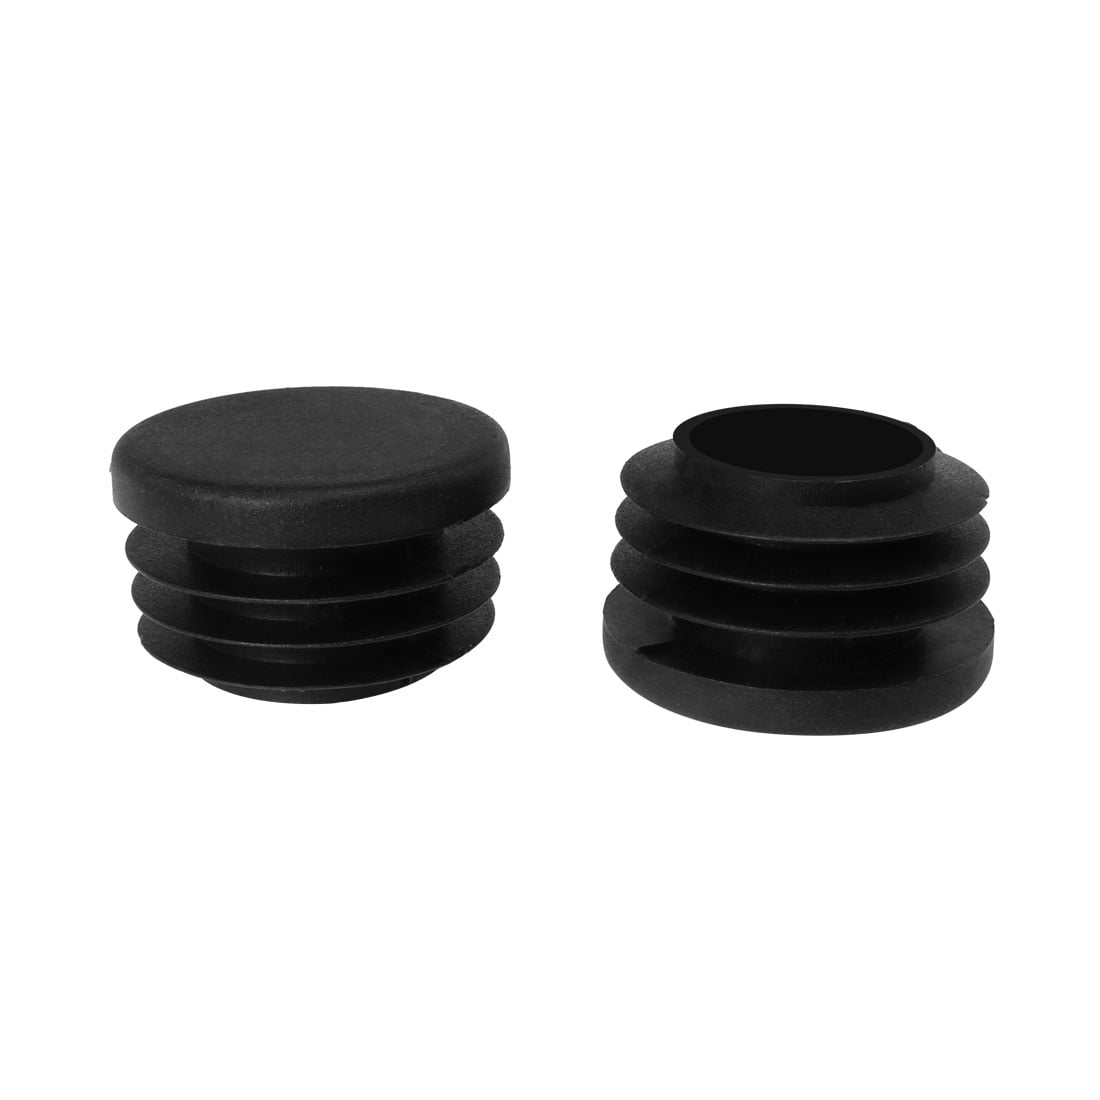 uxcell 30mm 1.18 OD Plastic Inserts Pipe 2pcs 1.06-1.14 Inner Dia Benches Caps 